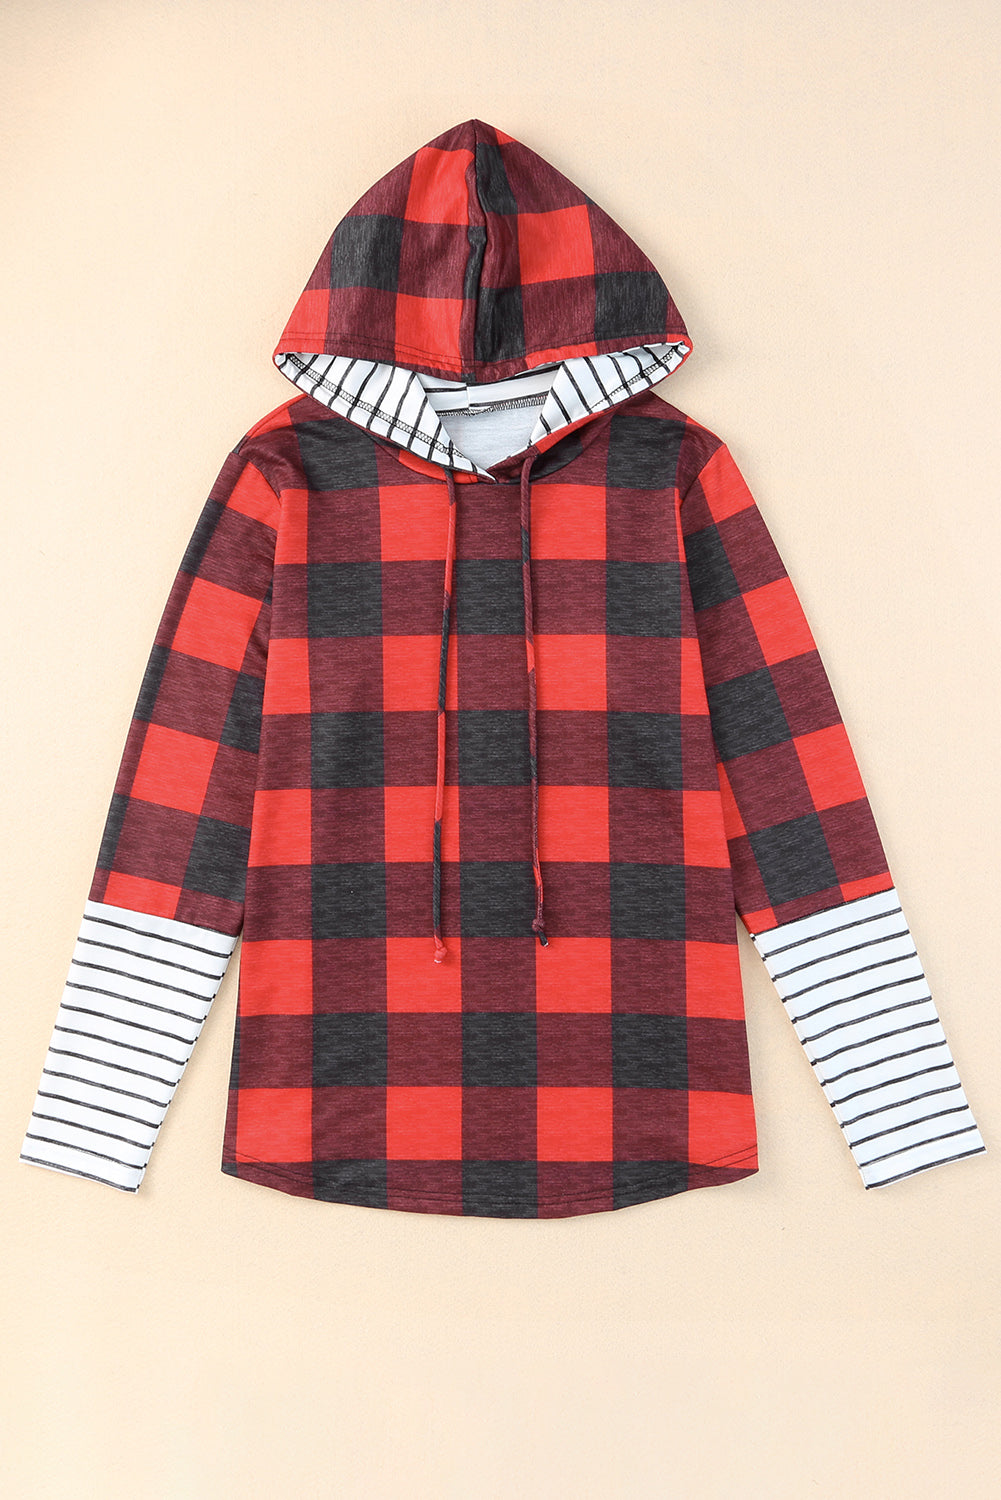 Fiery Red Christmas Plaid Striped Patchwork Drawstring Hoodie